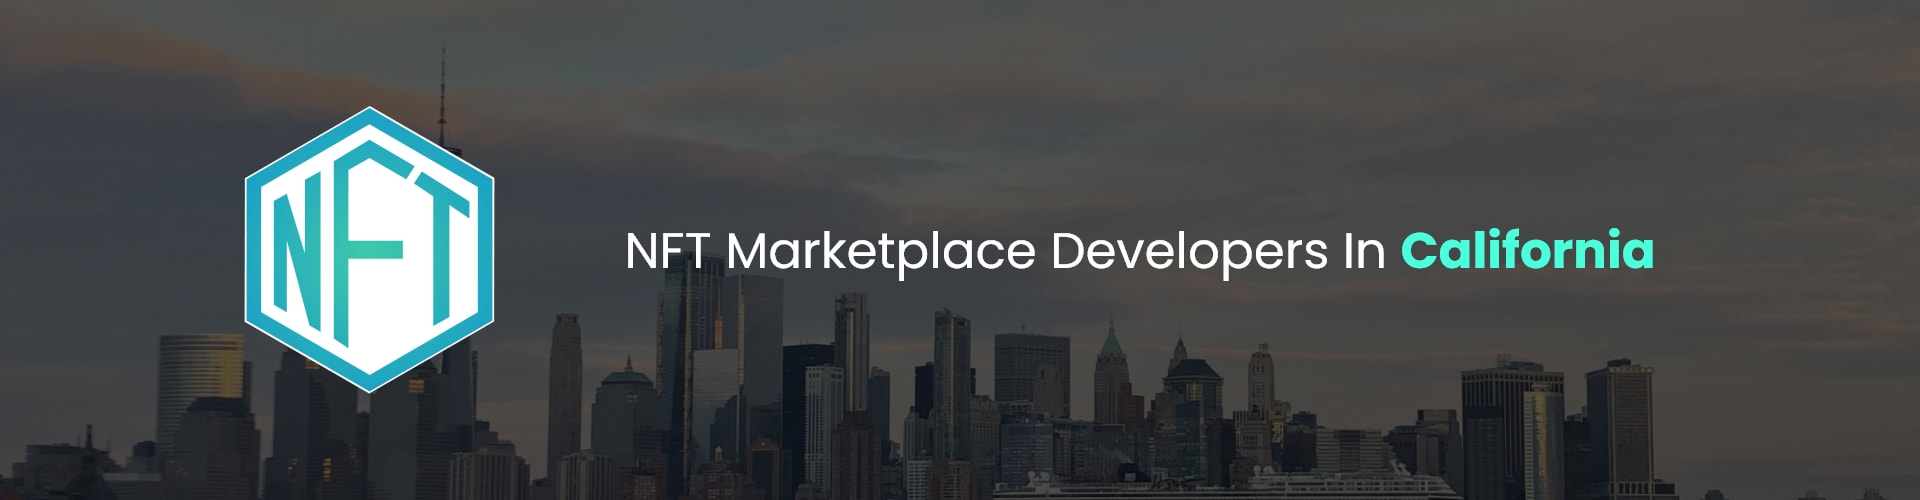 hire nft marketplace developers in california